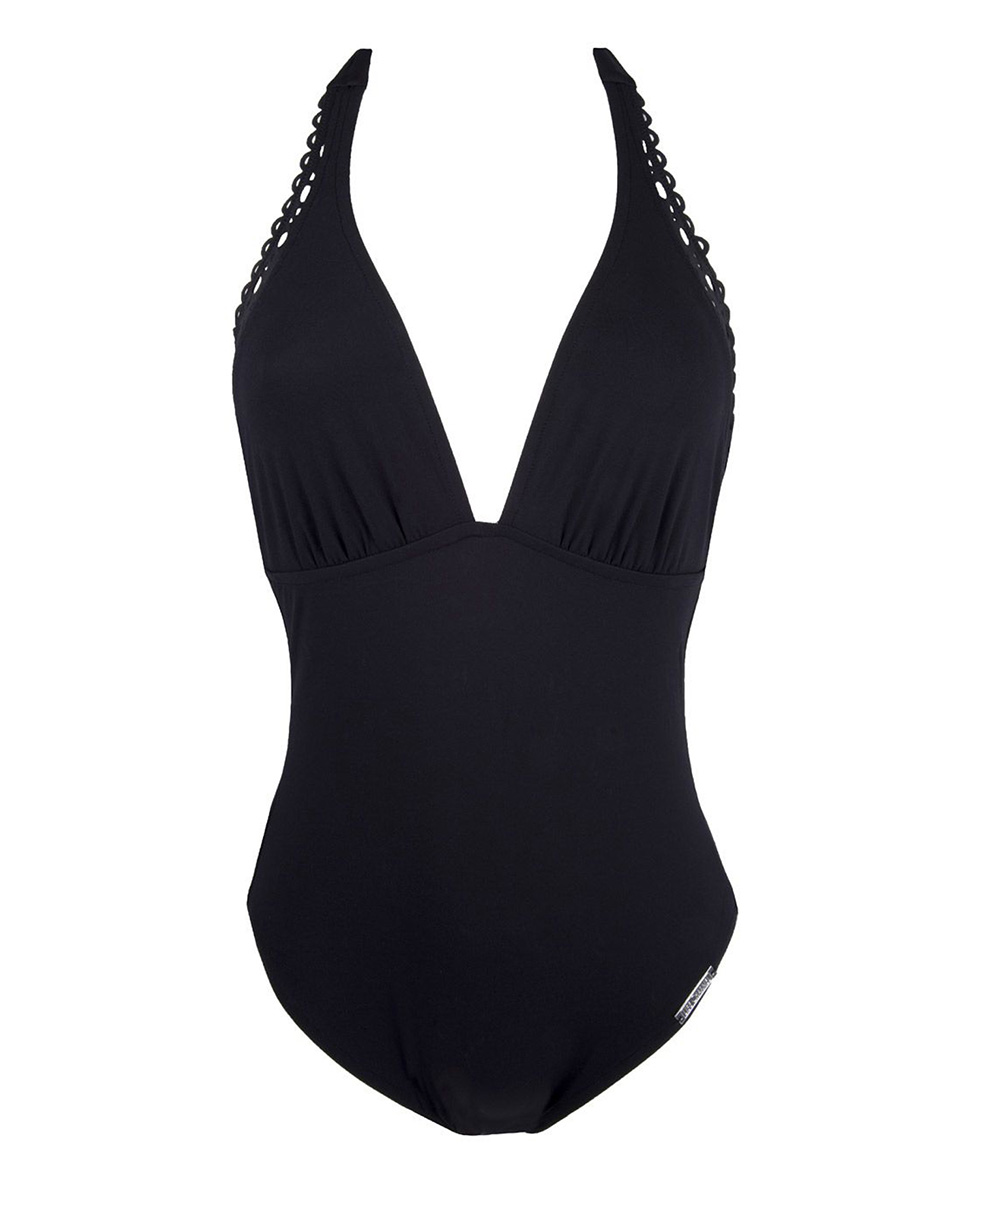 Open back one piece swimsuit Ajourage Couture black LISE CHARMEL